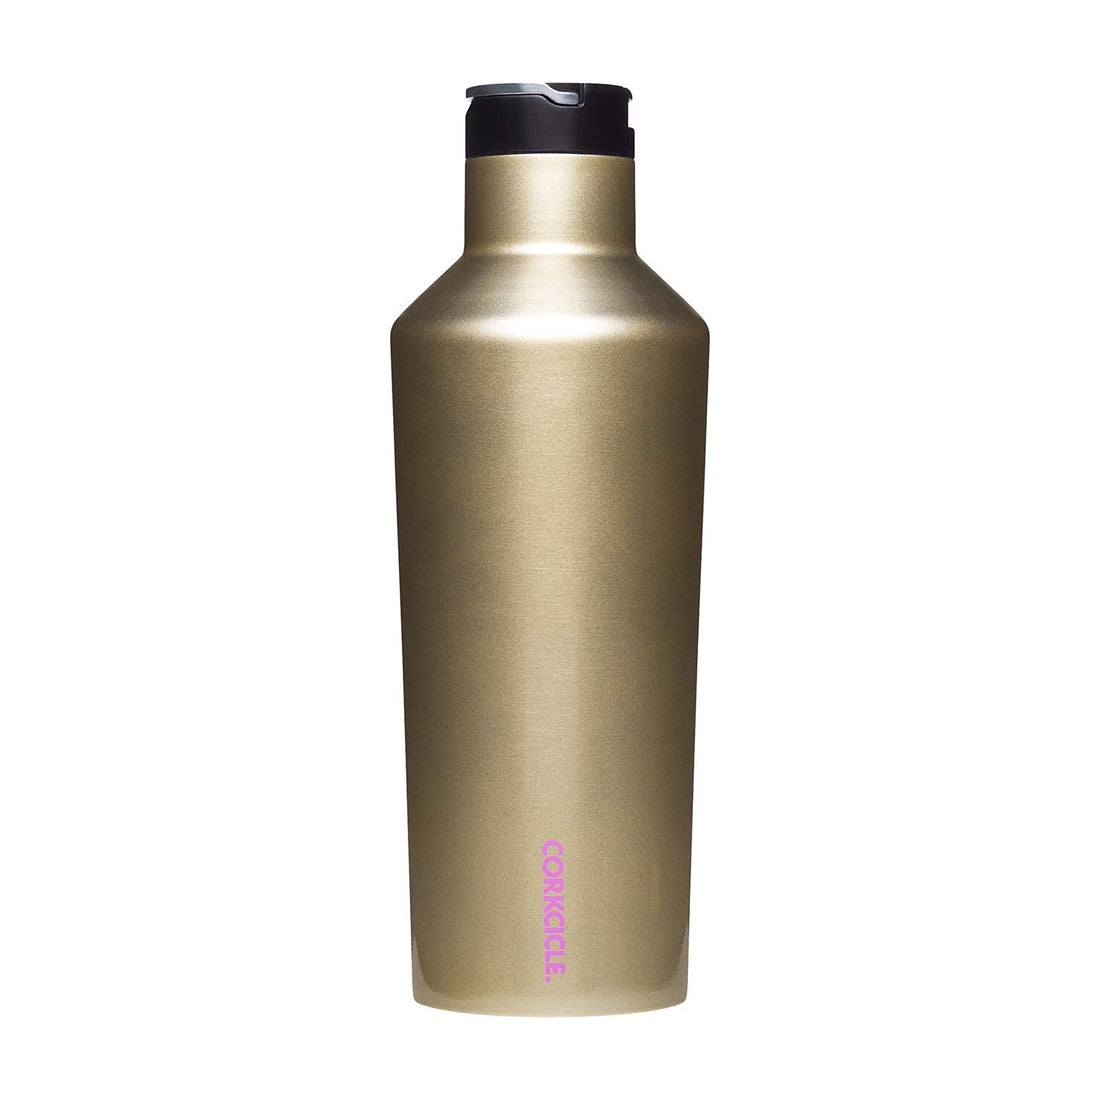 Corkcicle Canteen Sport Collection - Water Bottle & Thermos - Triple Insulated Shatterproof Stainless Steel, 40oz, Glampagne